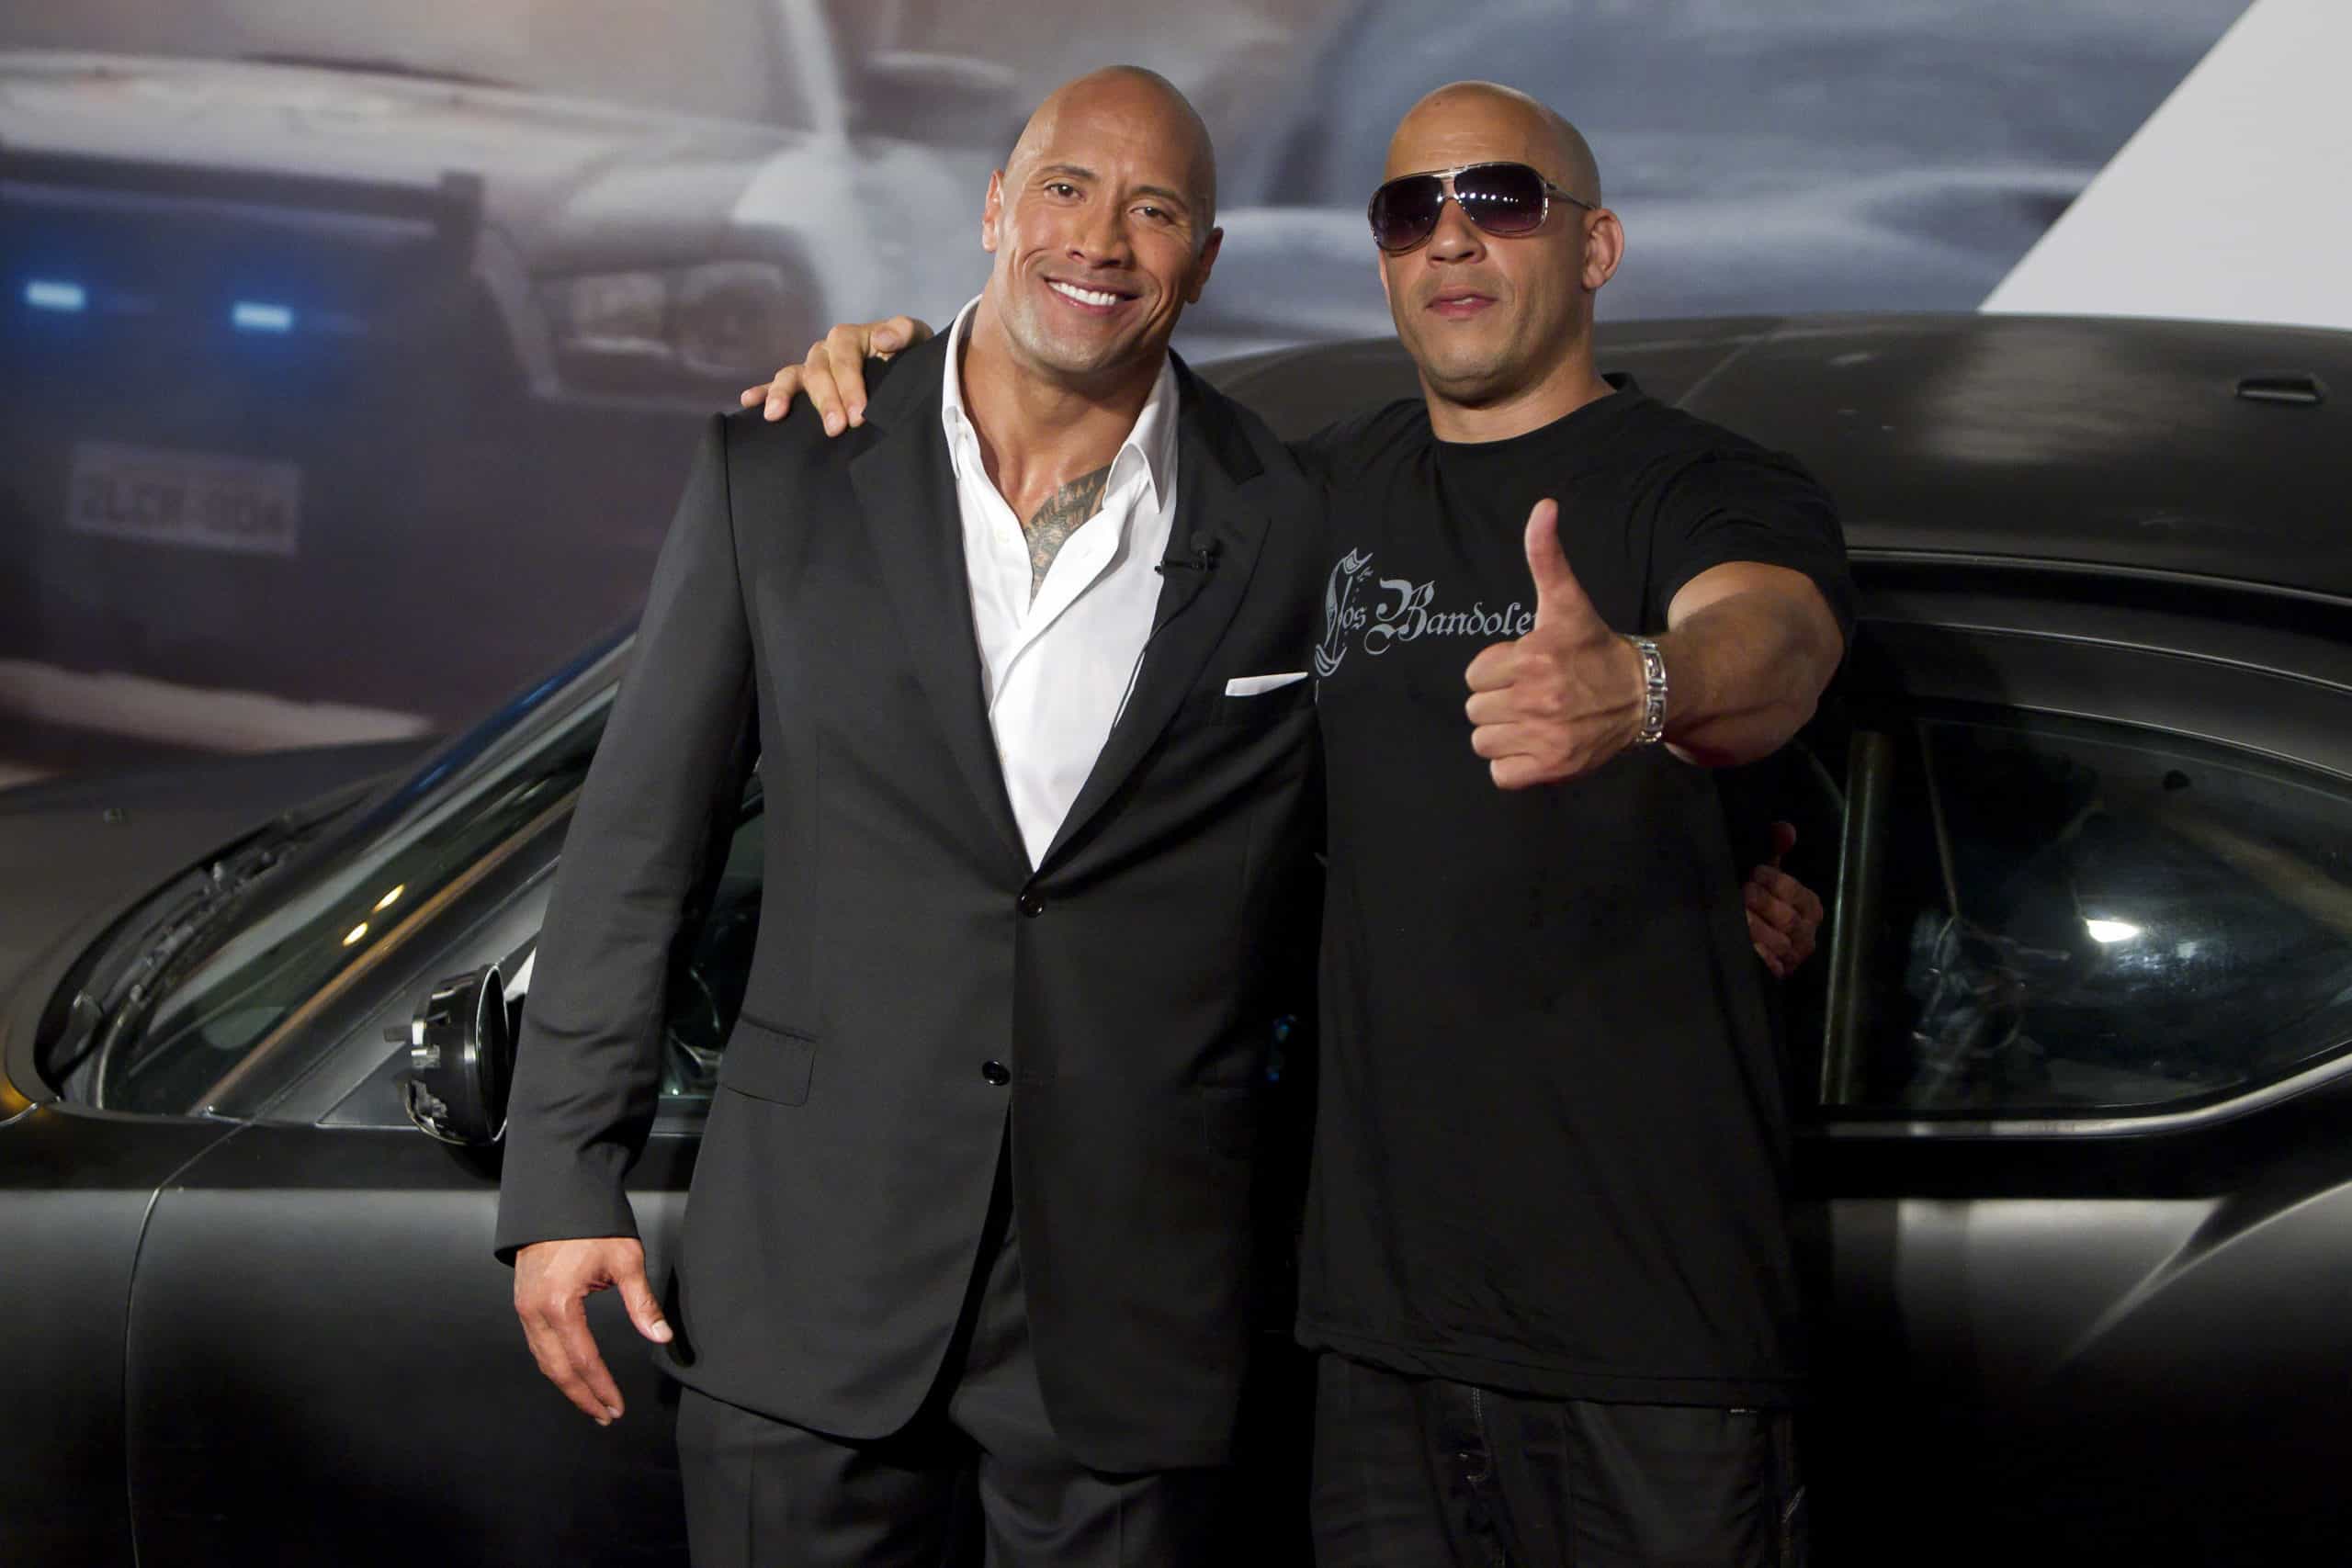 Vin Diesel sends a message to Dwayne "The Rock" Johnson to get him to return to the "Fast & Furious" franchise after their falling out.